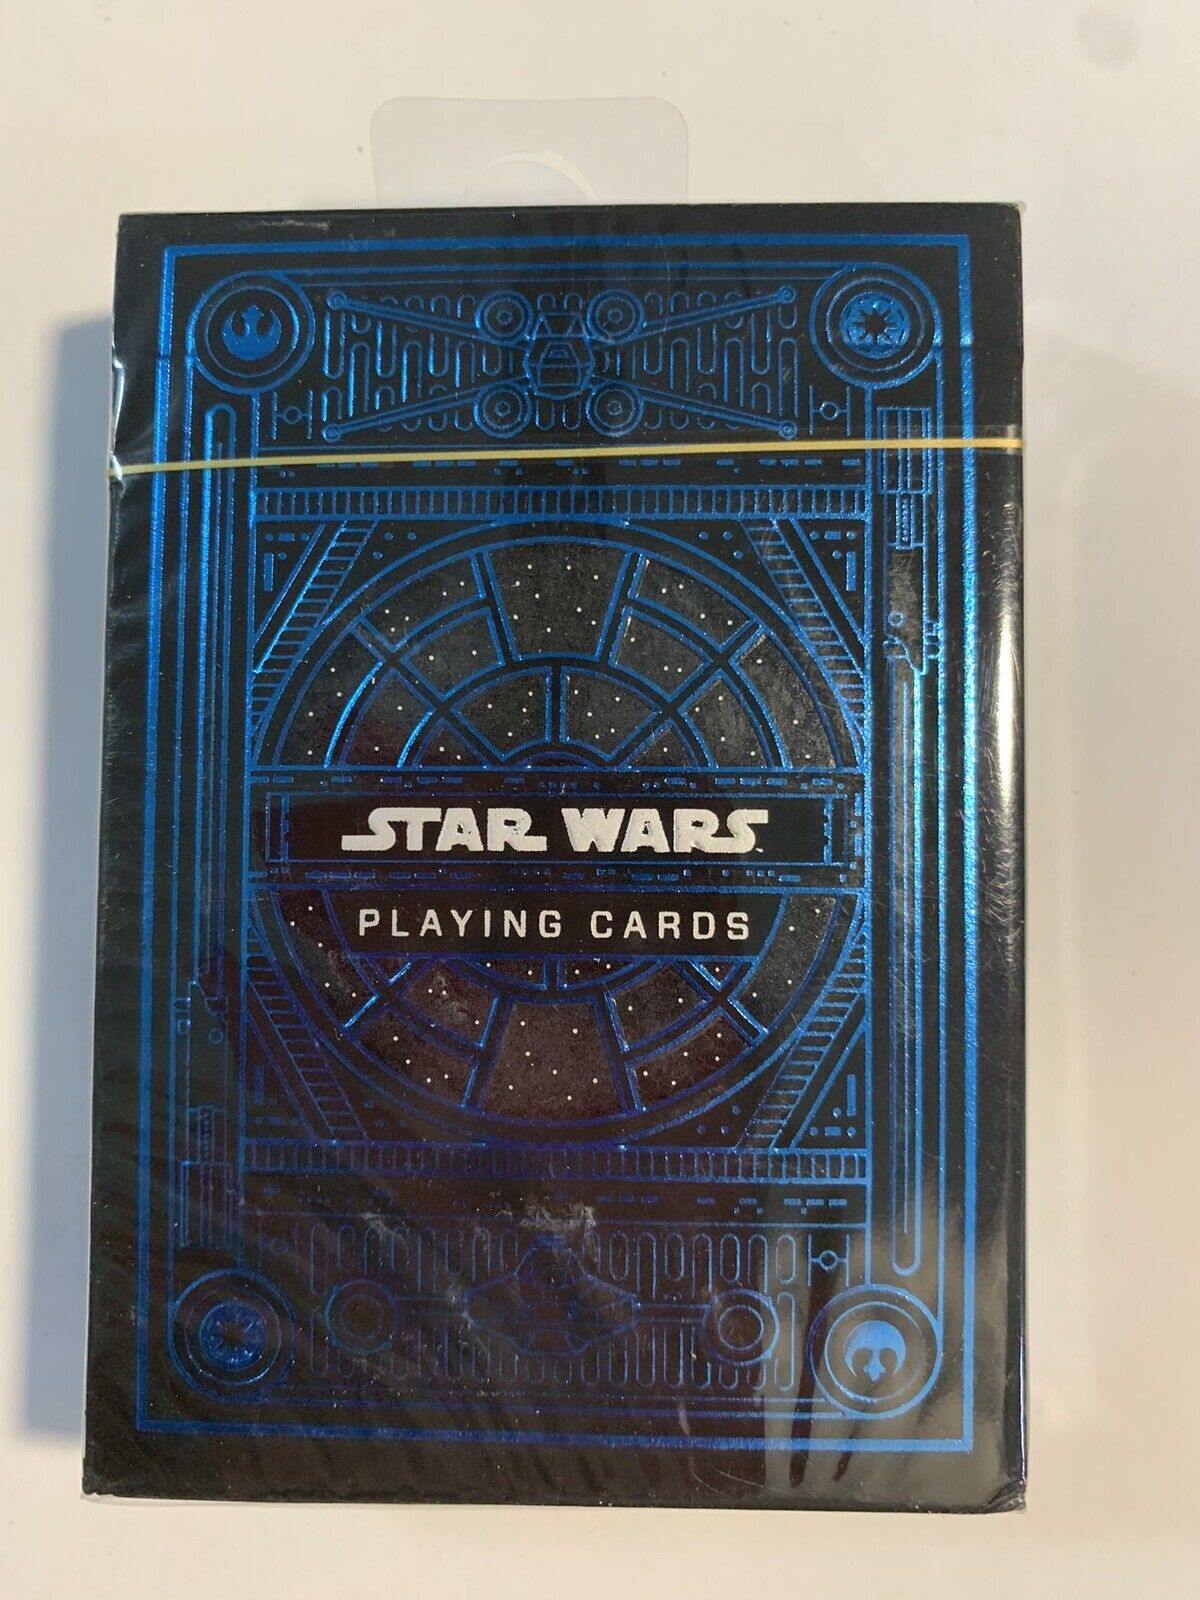 Theory 11 Star Wars Playing Cards Force Be With You Blue Light New Theory11